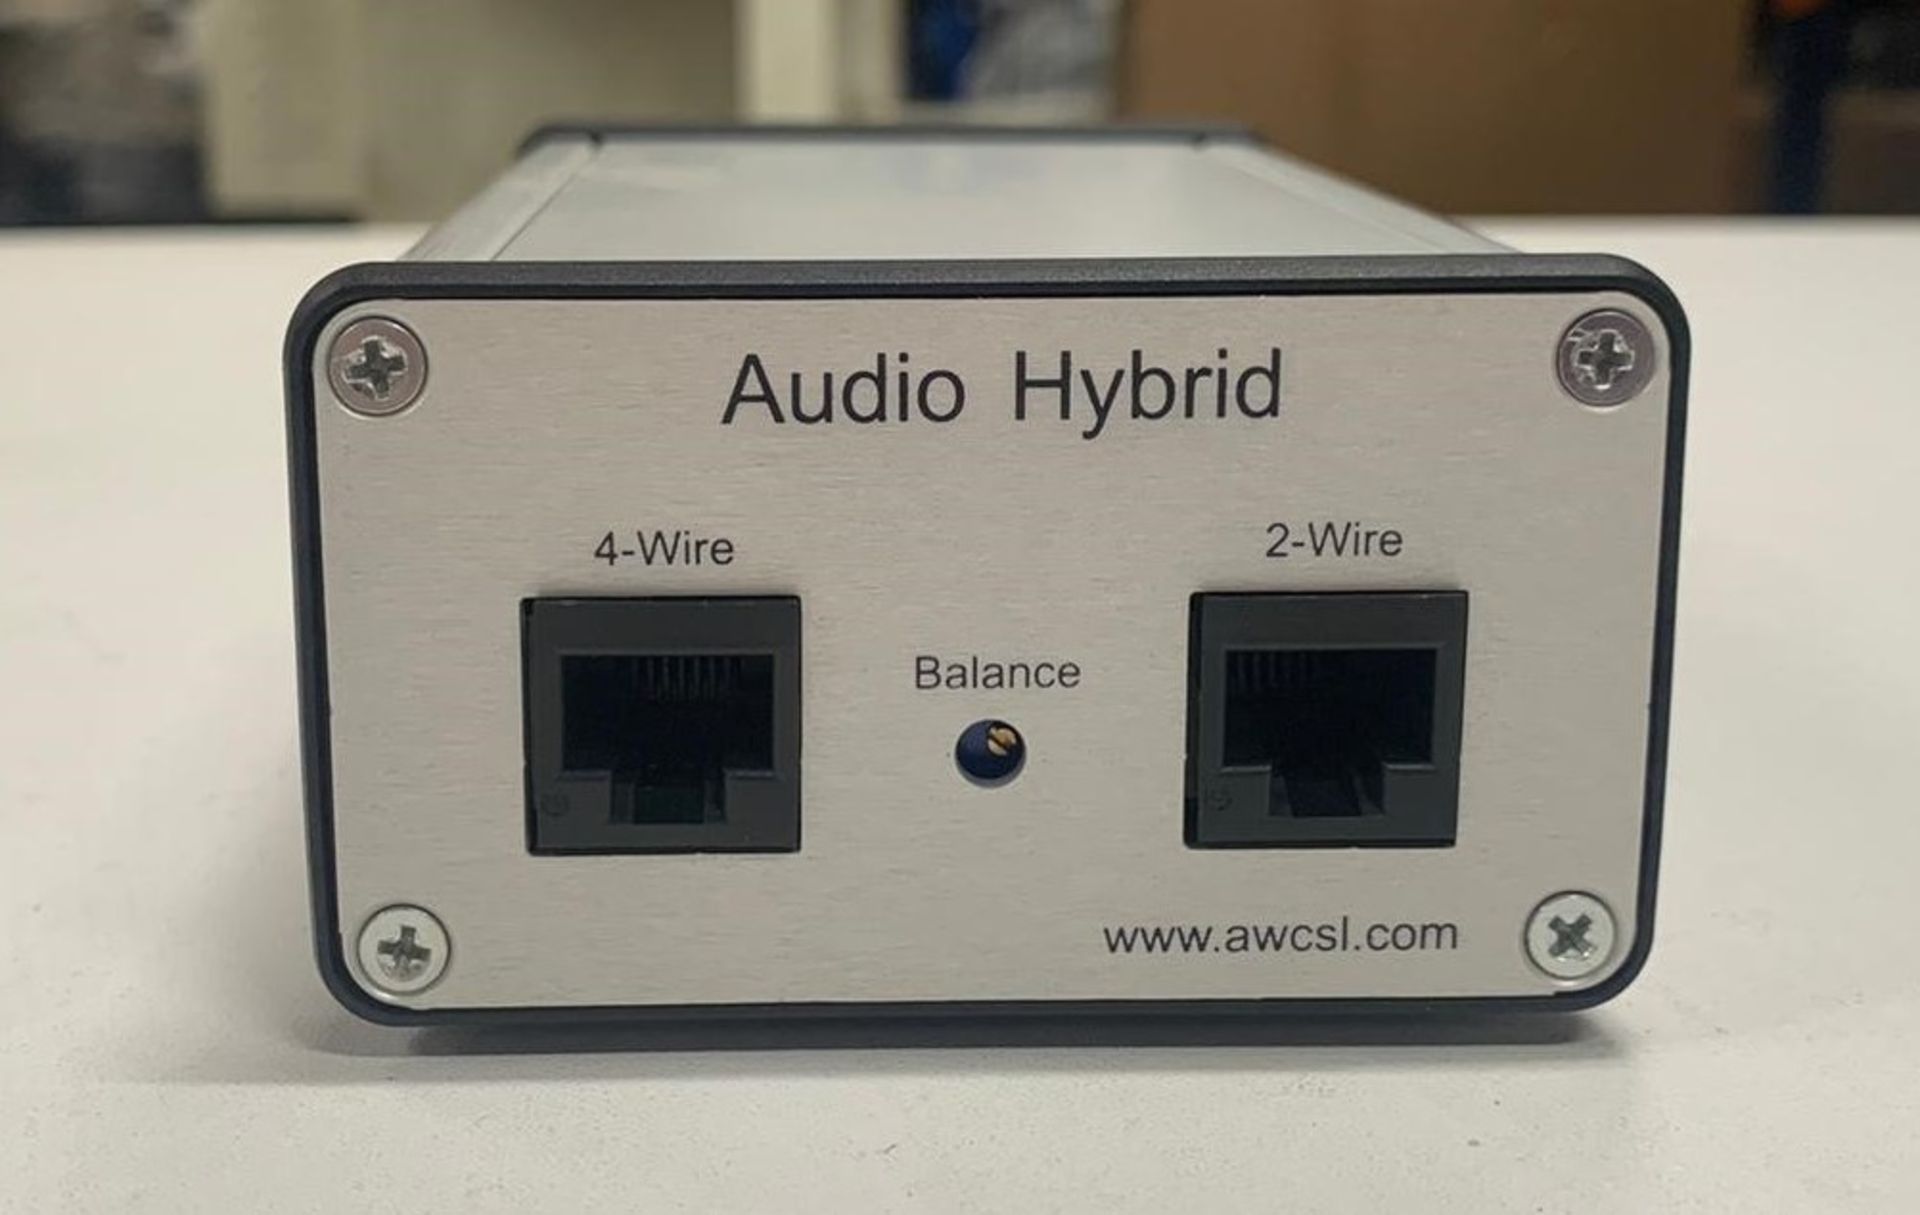 10 x Audio Hybrid A.W Communication Systems - Image 2 of 3